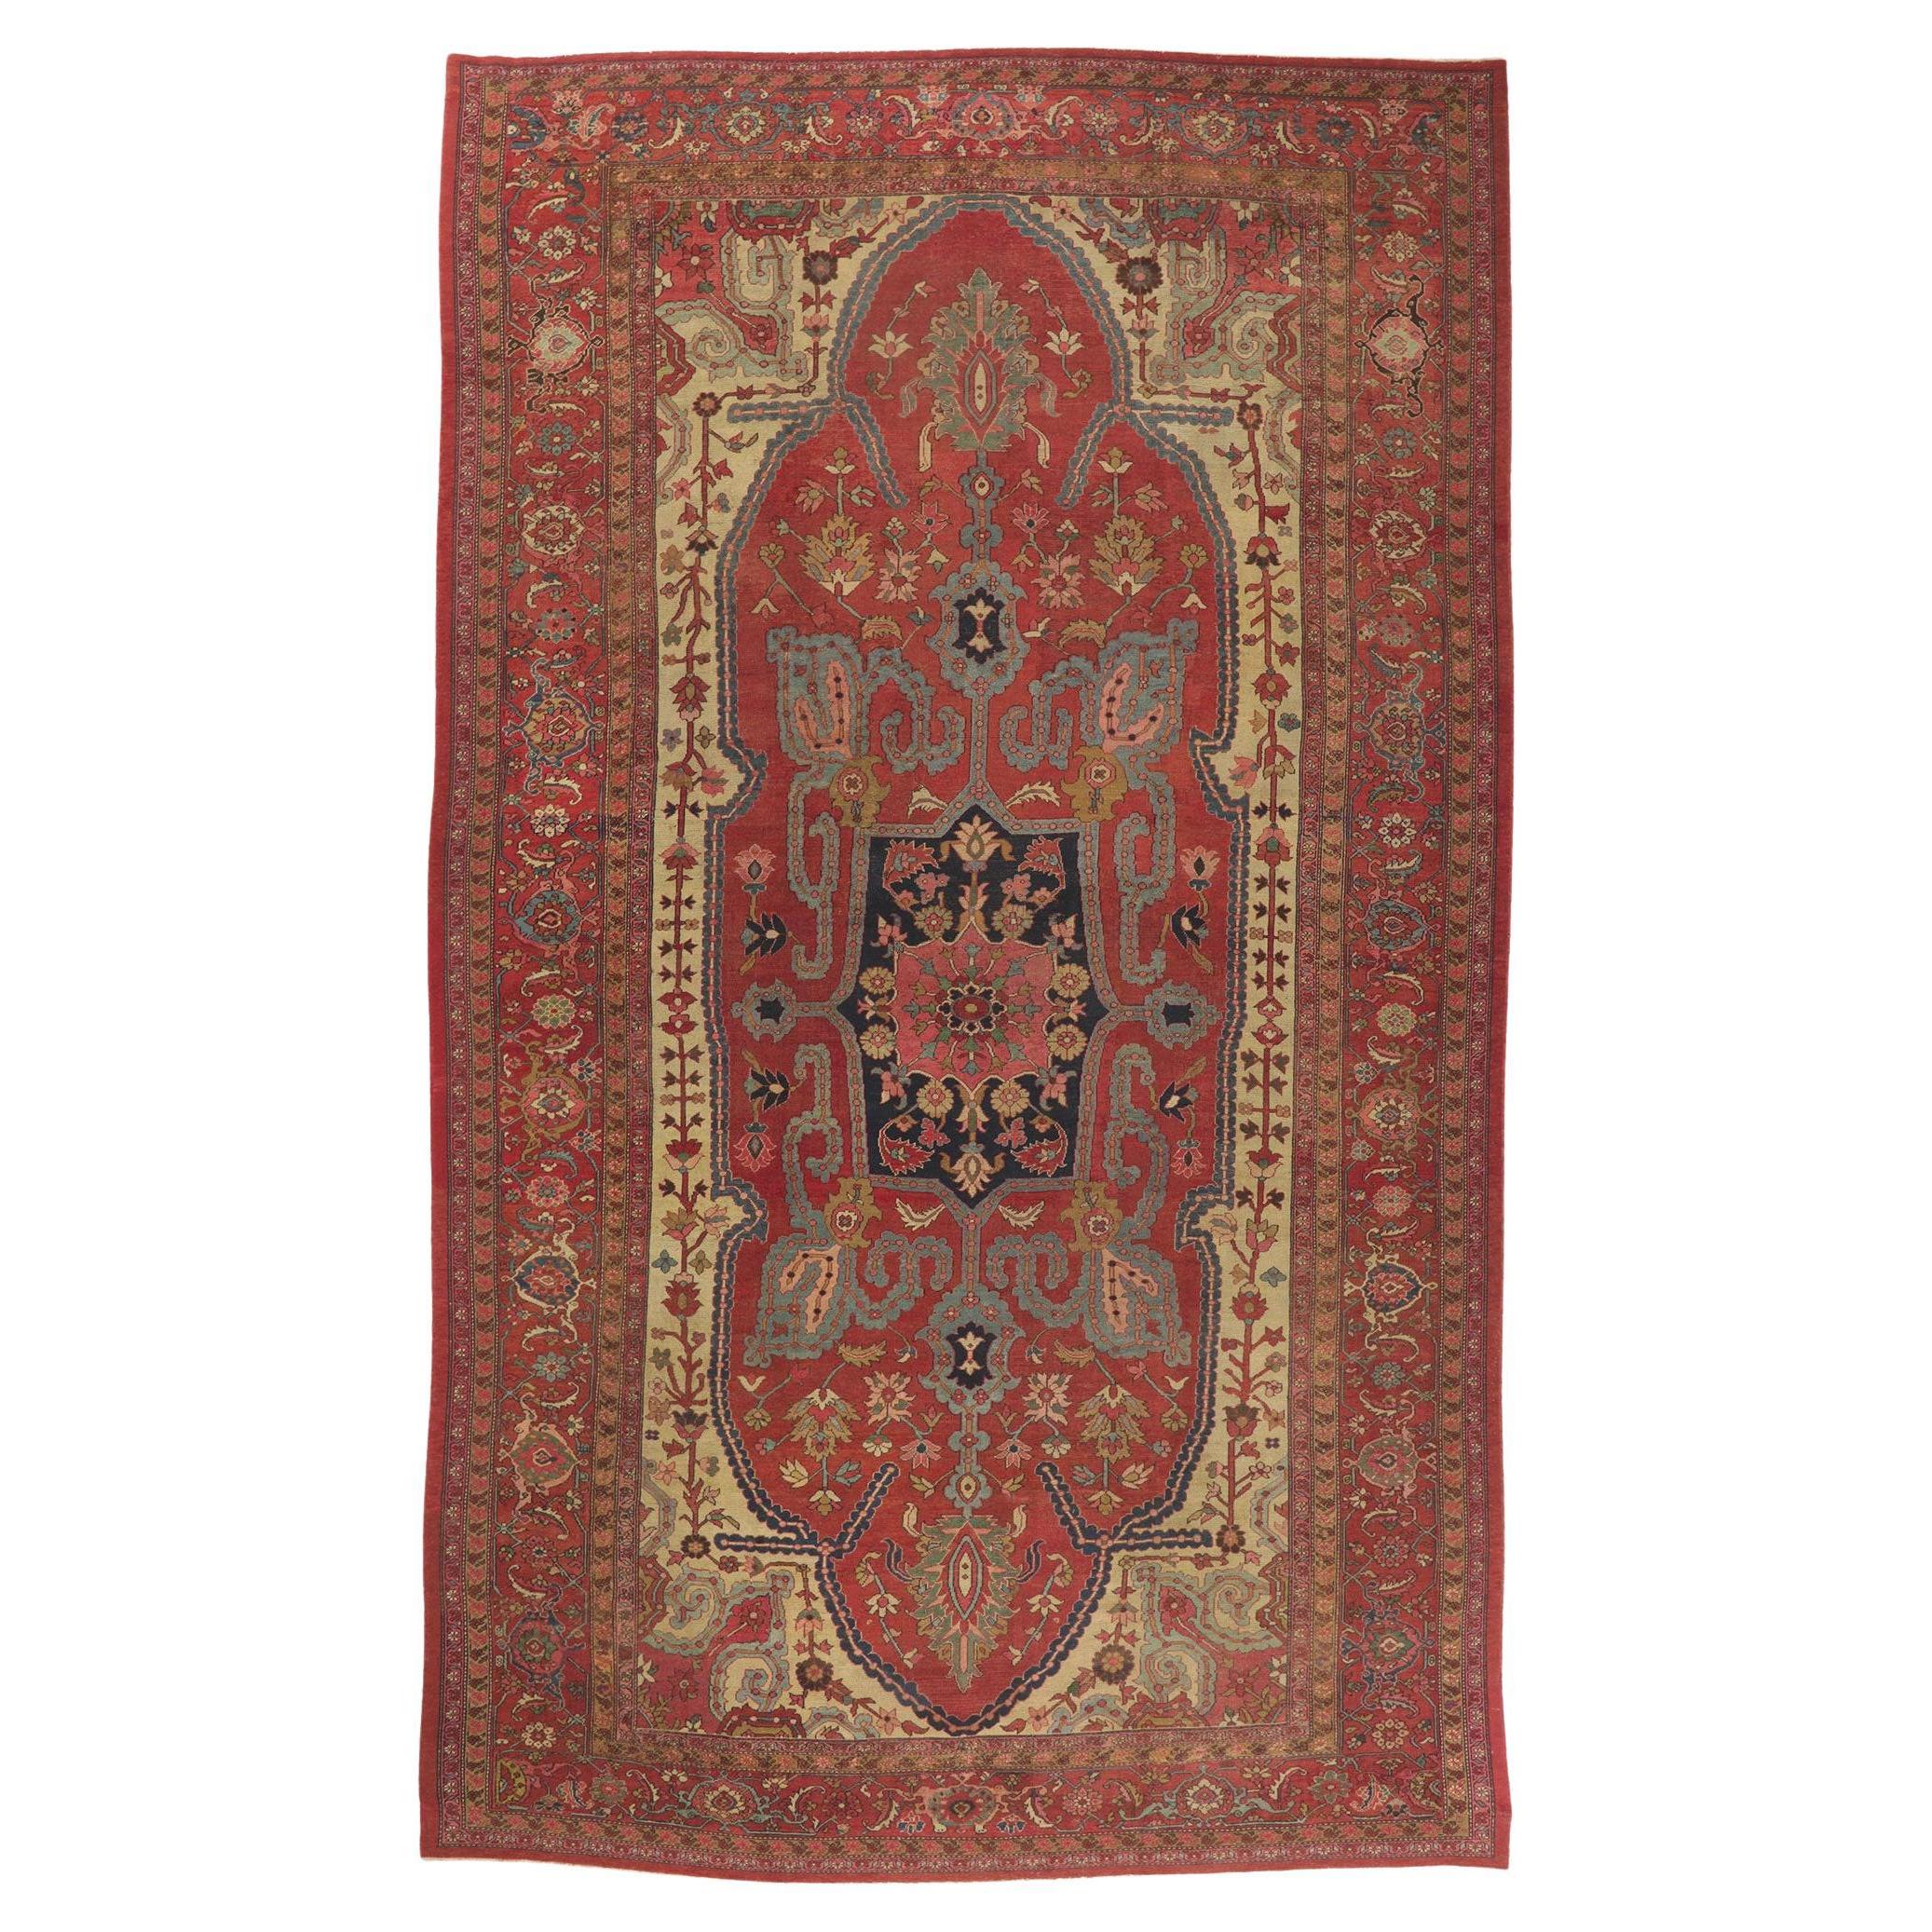 Oversized Antique Persian Bakshaish Rug, Timeless Appeal Meets Perpetually Posh